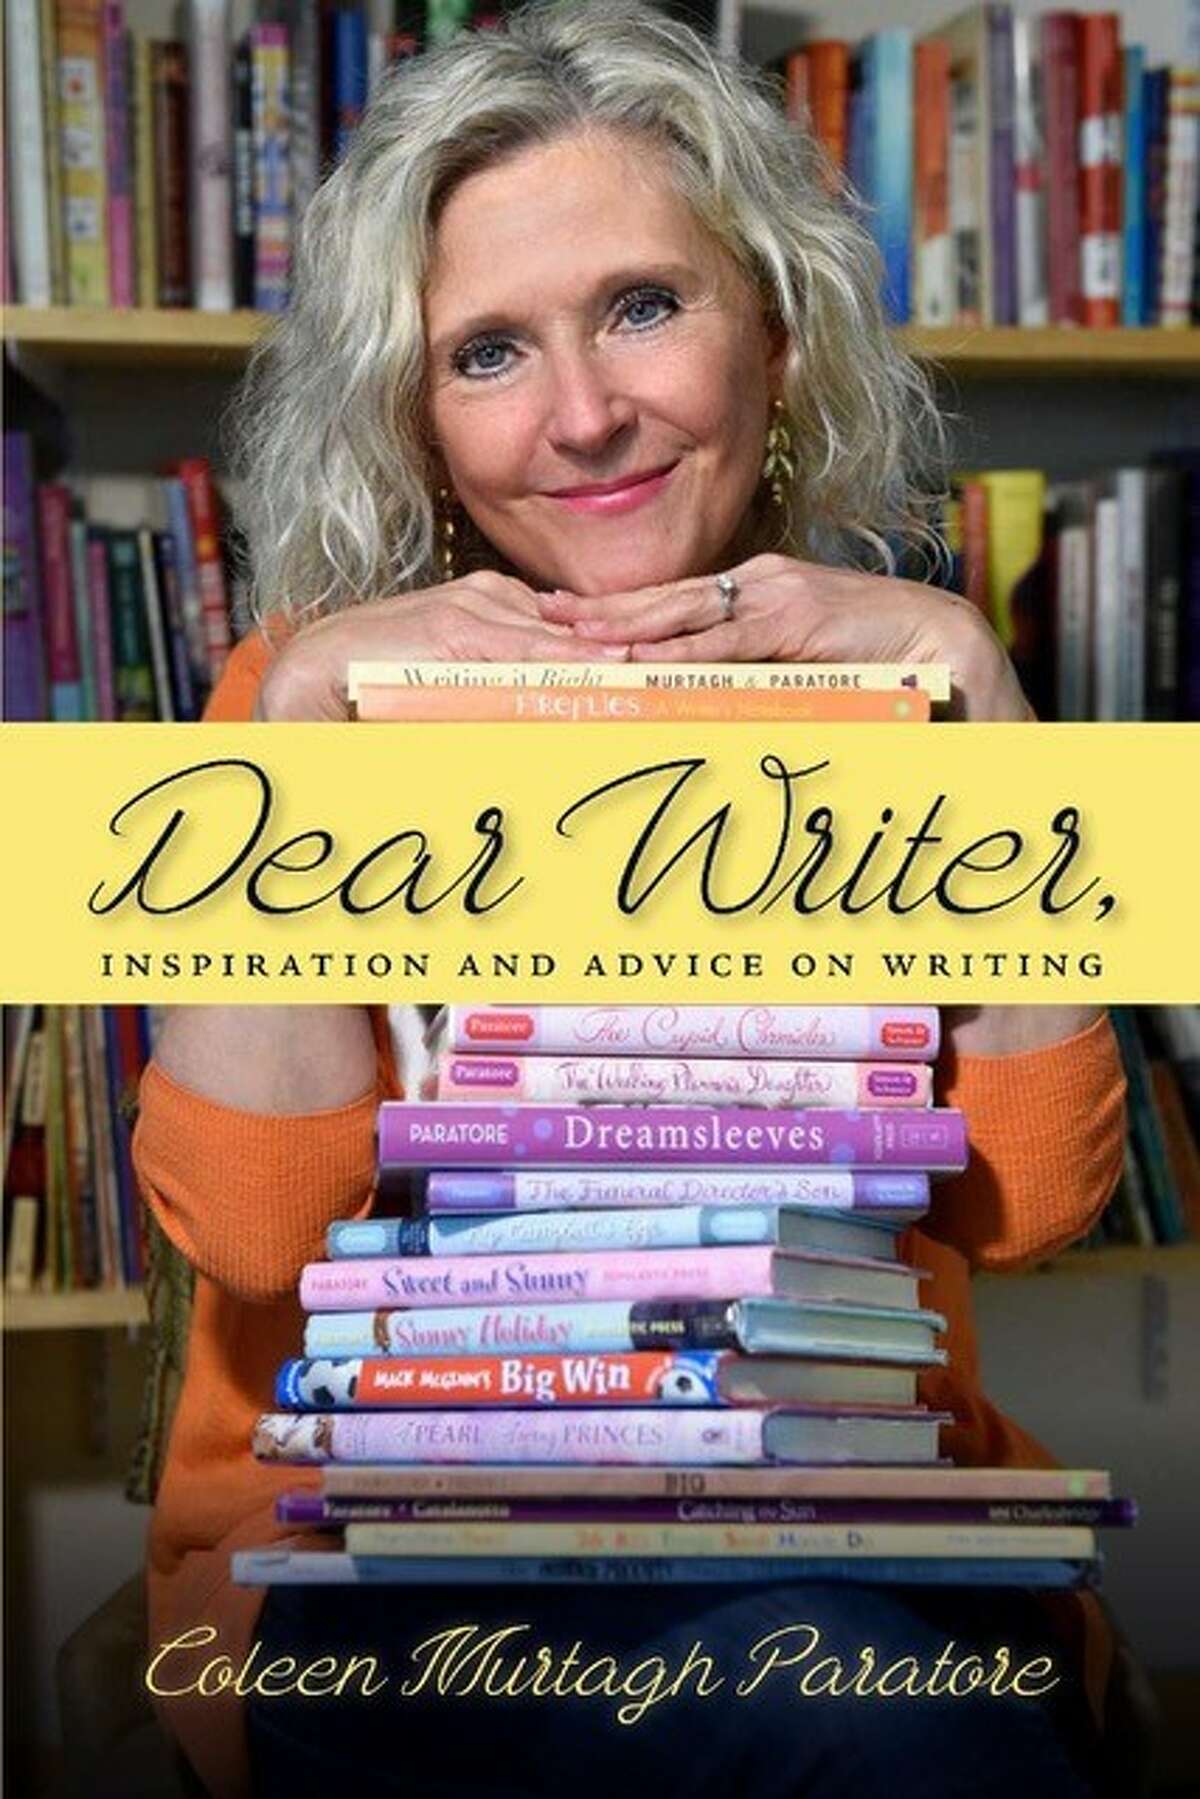 Coleen Murtagh Paratore's "Dear Writer, Inspiration and Advice on Writing."